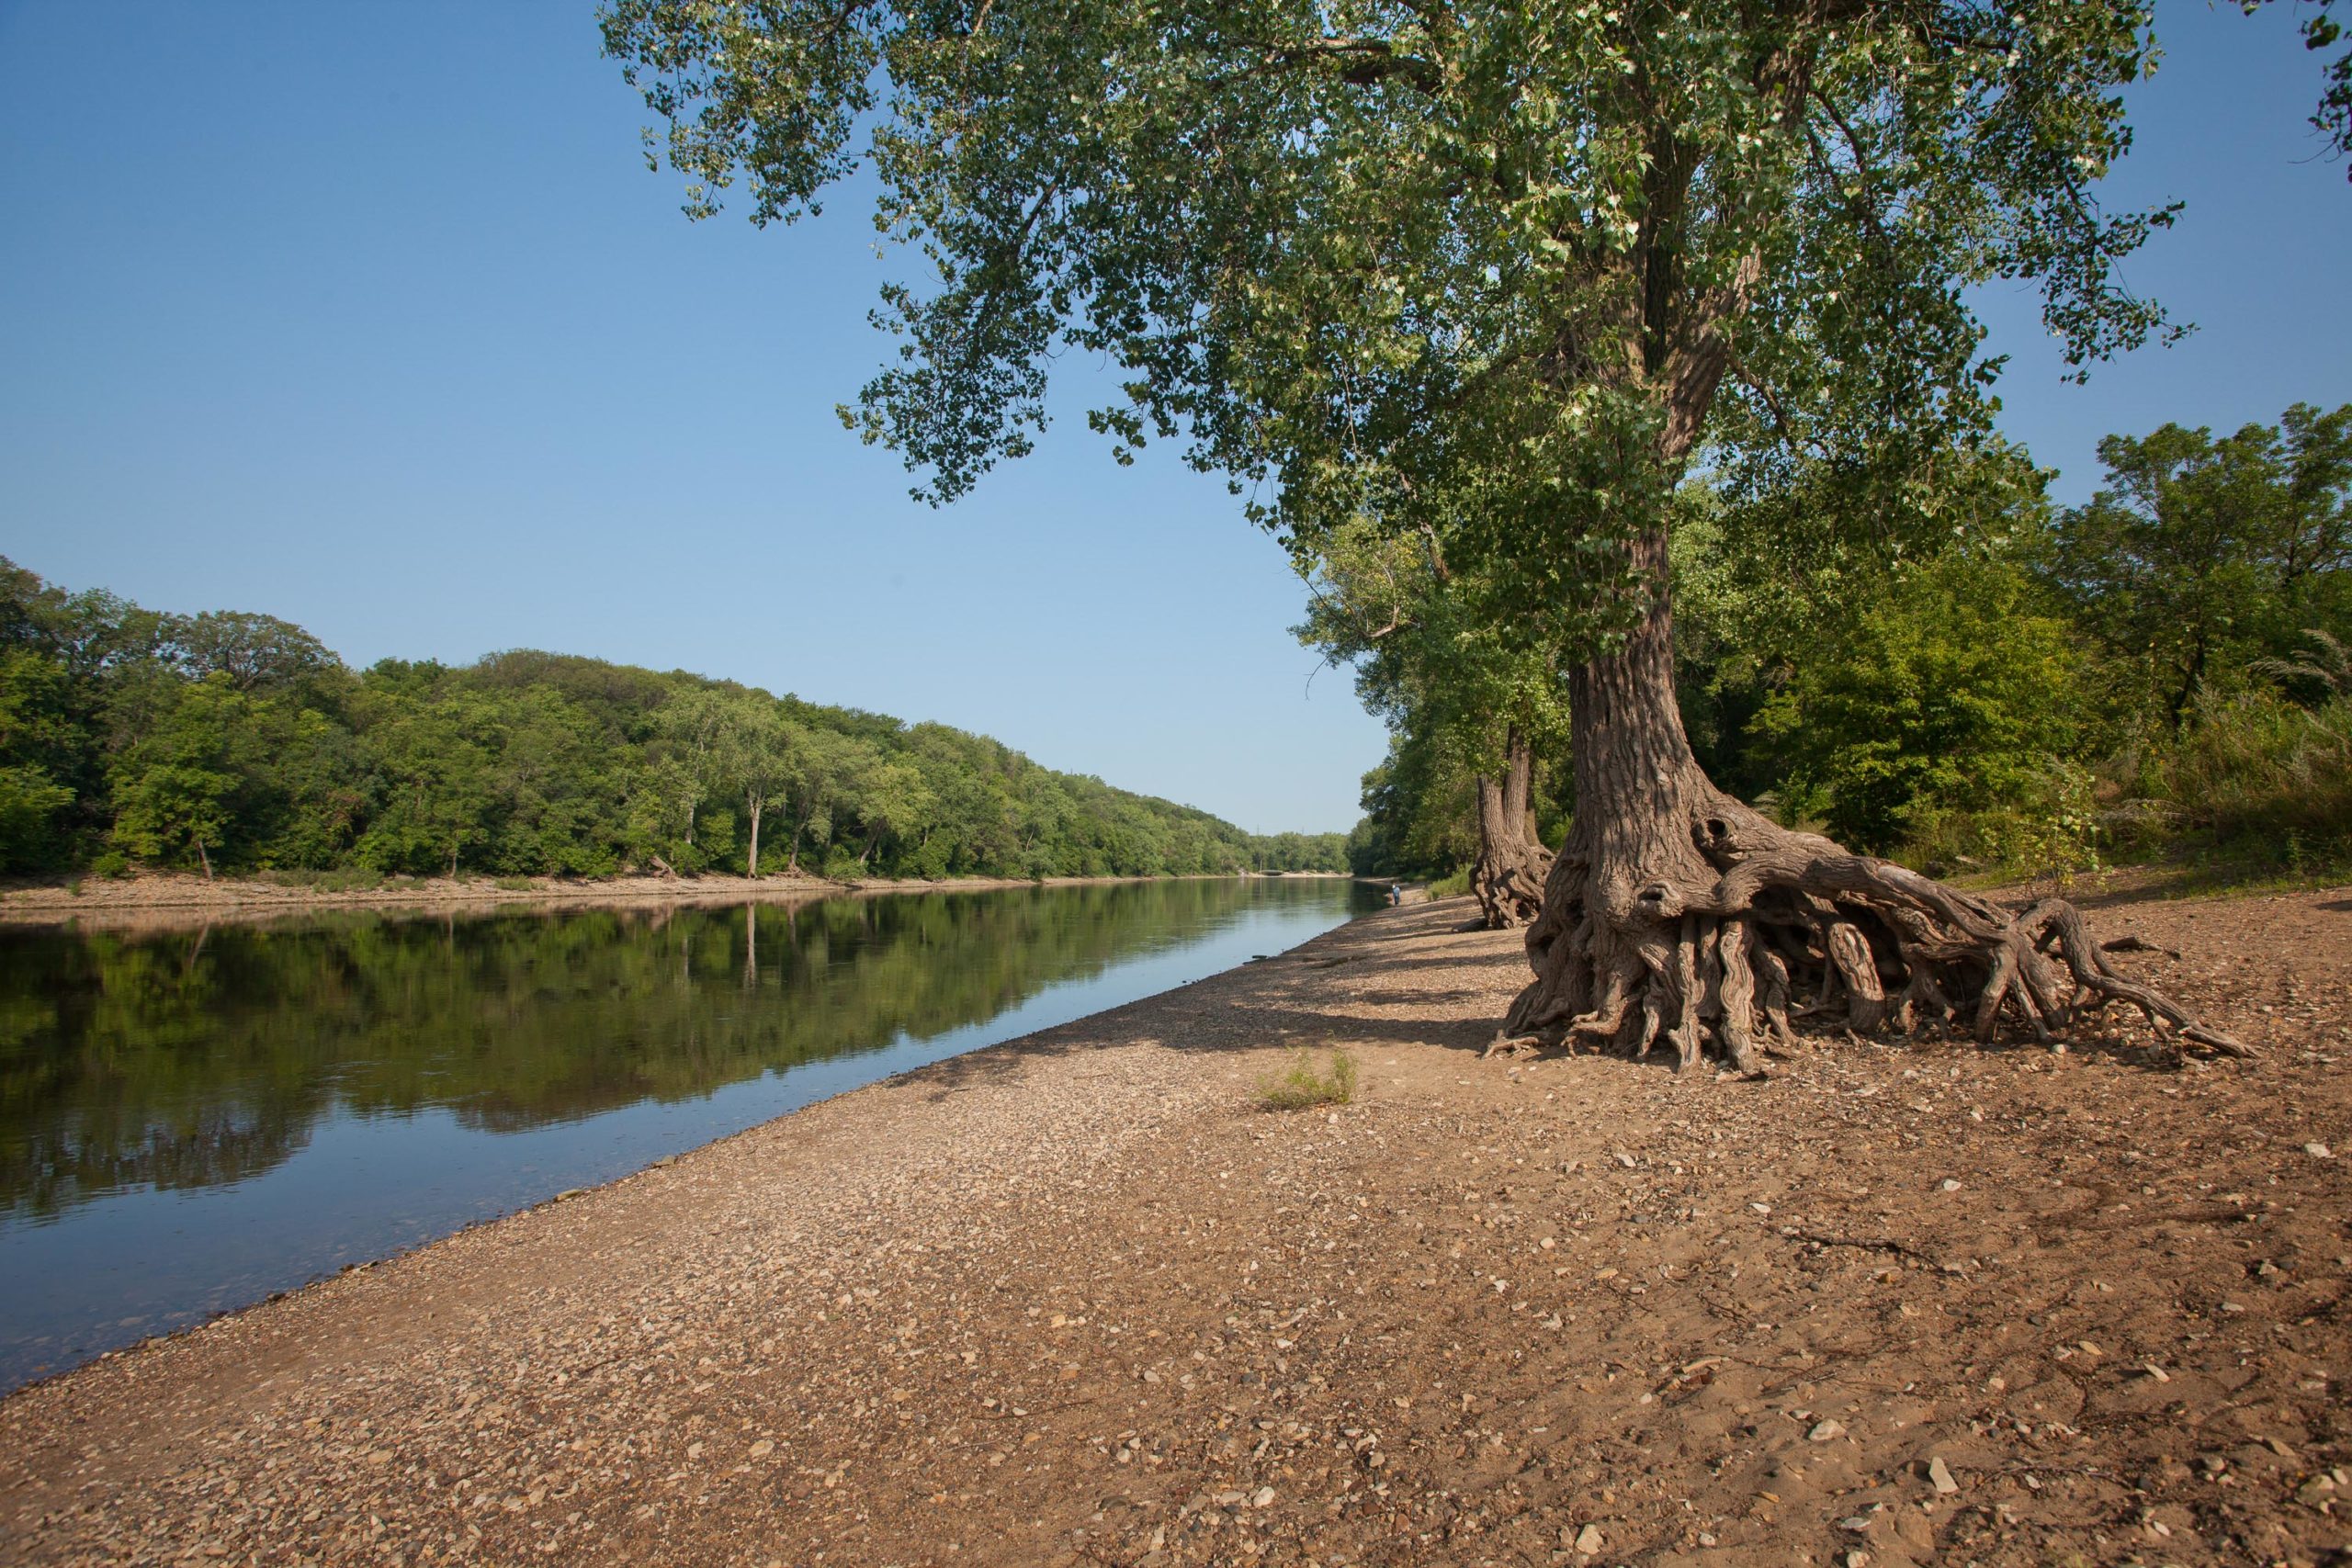 From Louisiana to Minnesota, the Mississippi River runs through many states and ecosystems.